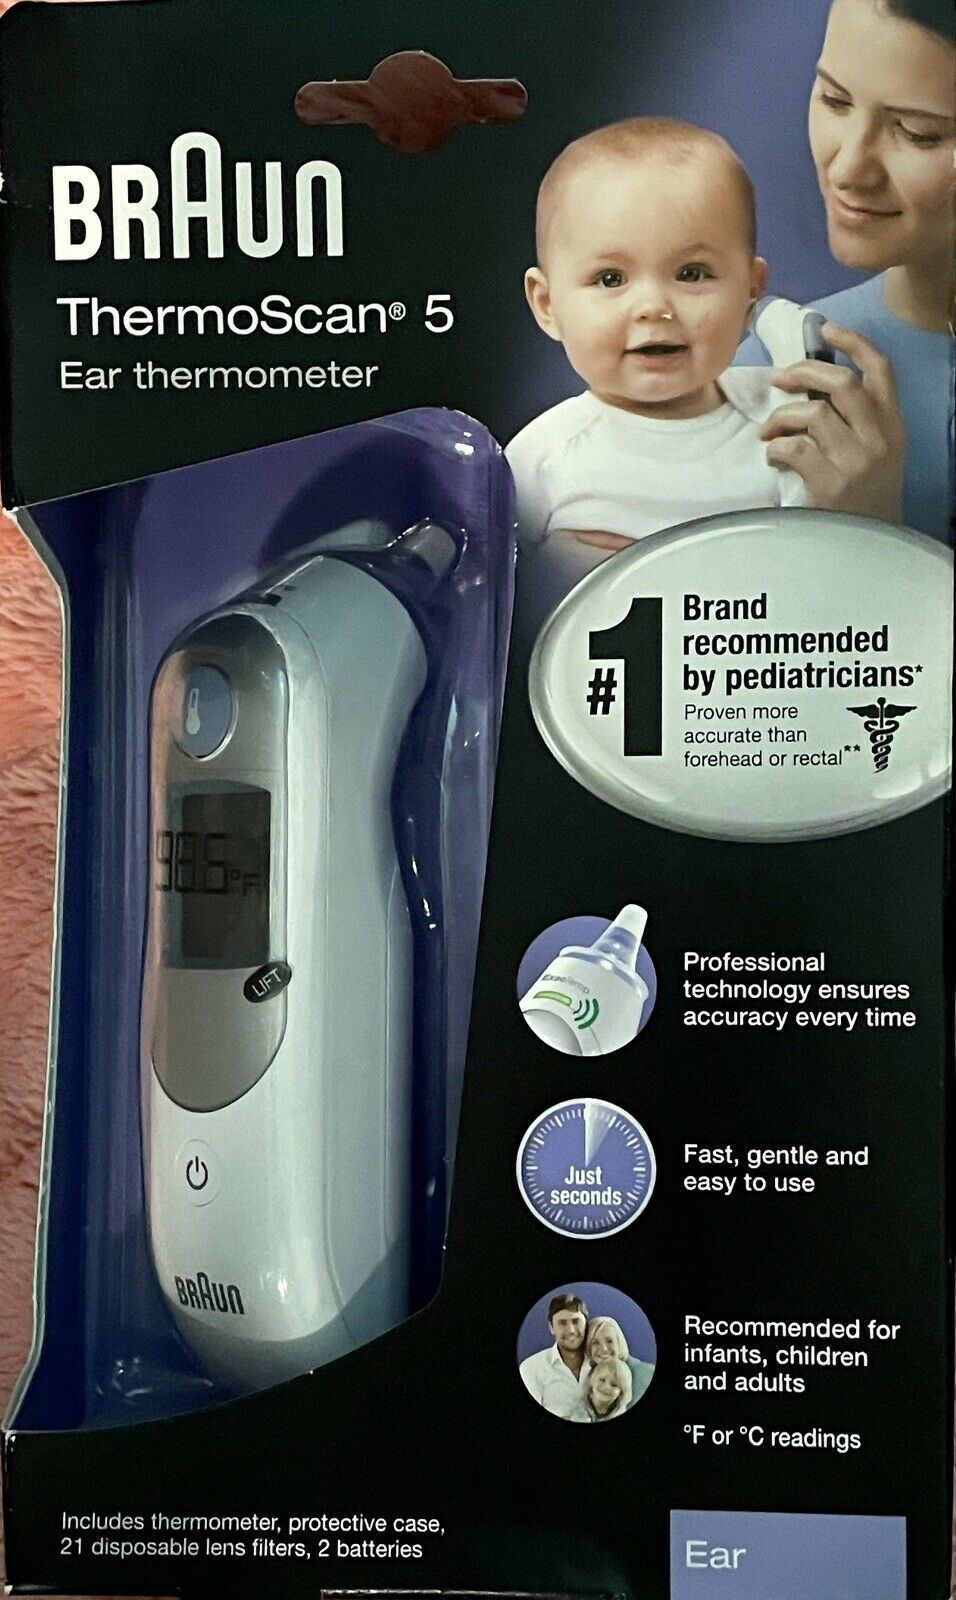 Braun ThermoScan 5 Ear Thermometer - Model IRT6500 NEW IN BOX.